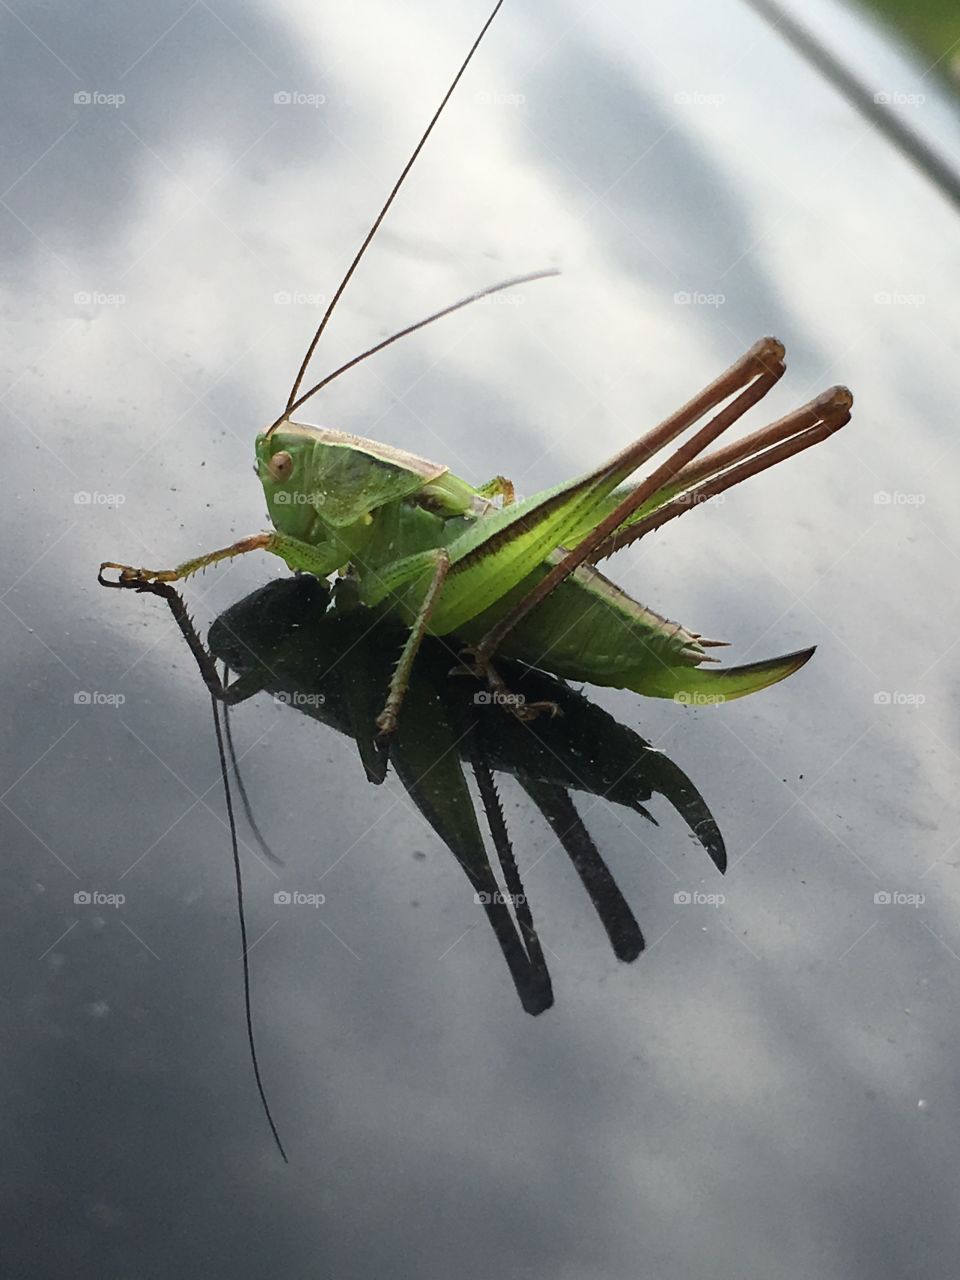 large green grasshopper sits on the hood of the car.